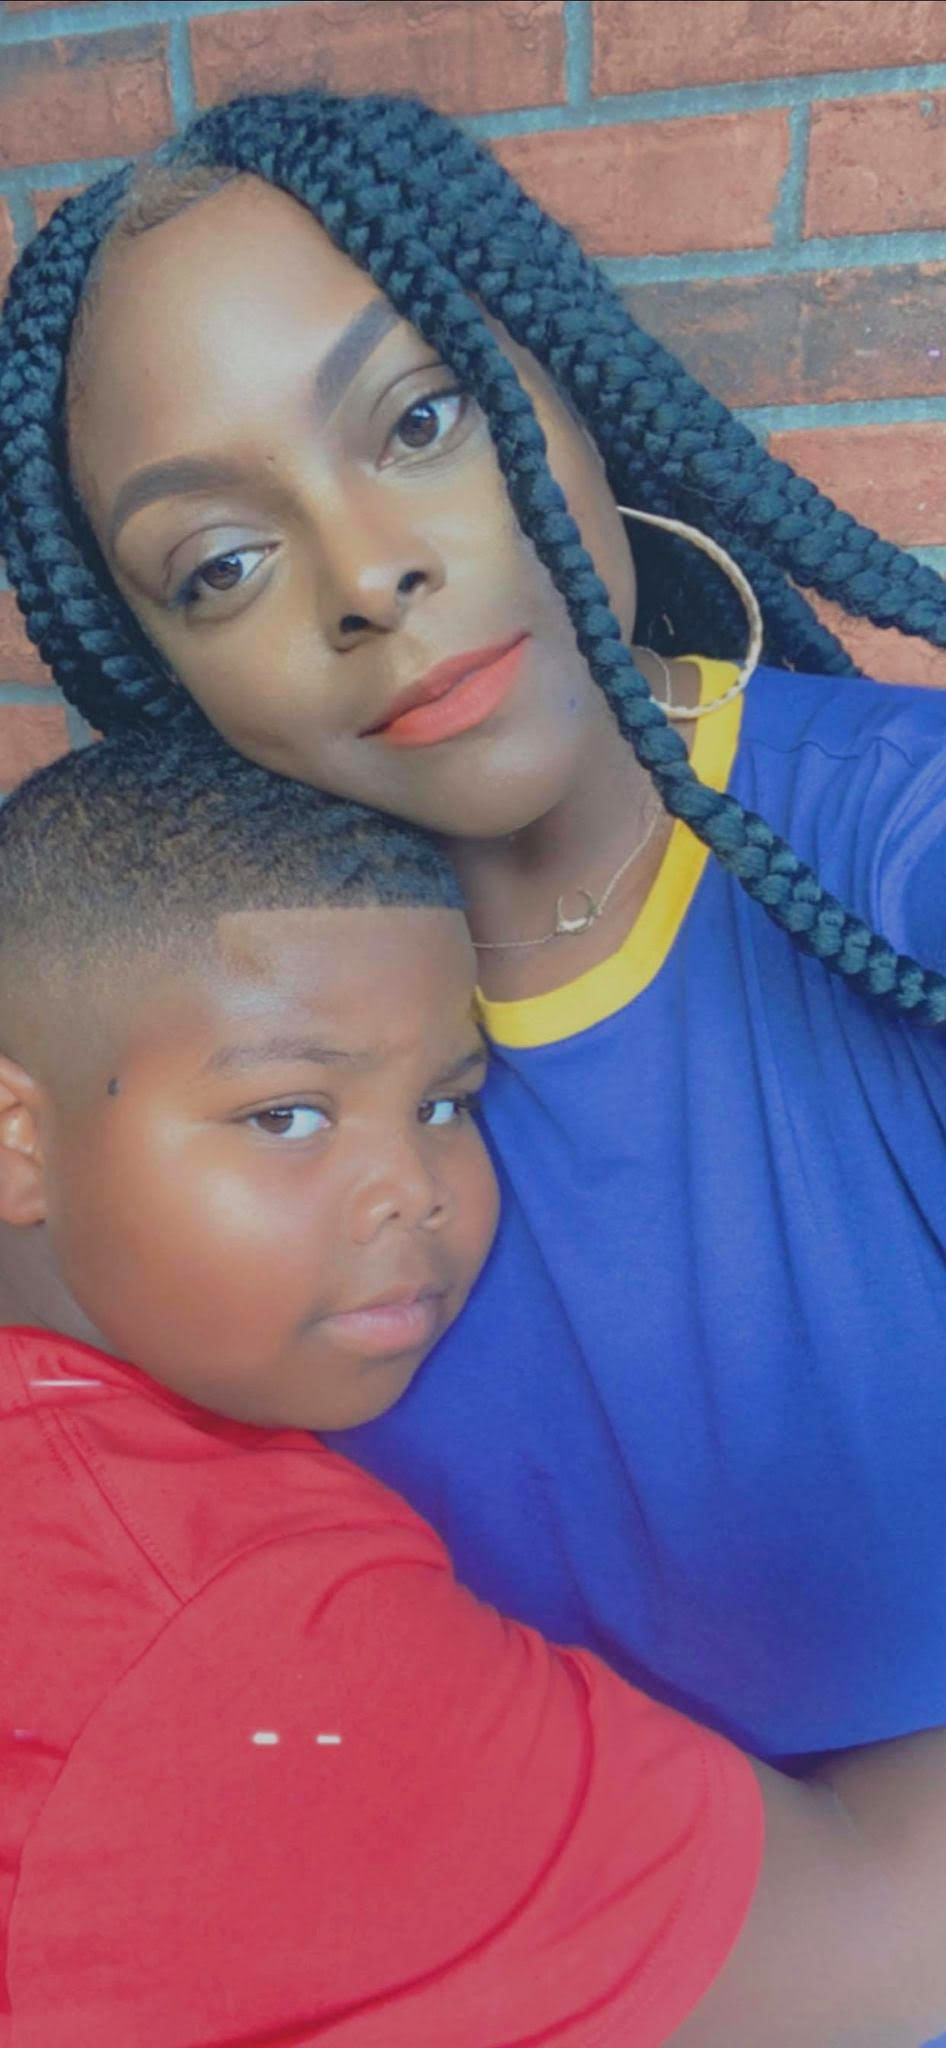 Selfie of Carnesia with her son in front of a brick wall. She is wearing a blue shirt and has braids. She is leaning her head on her son who has his arms around her waist and his head on her shoulder. He is wearing a red shirt.